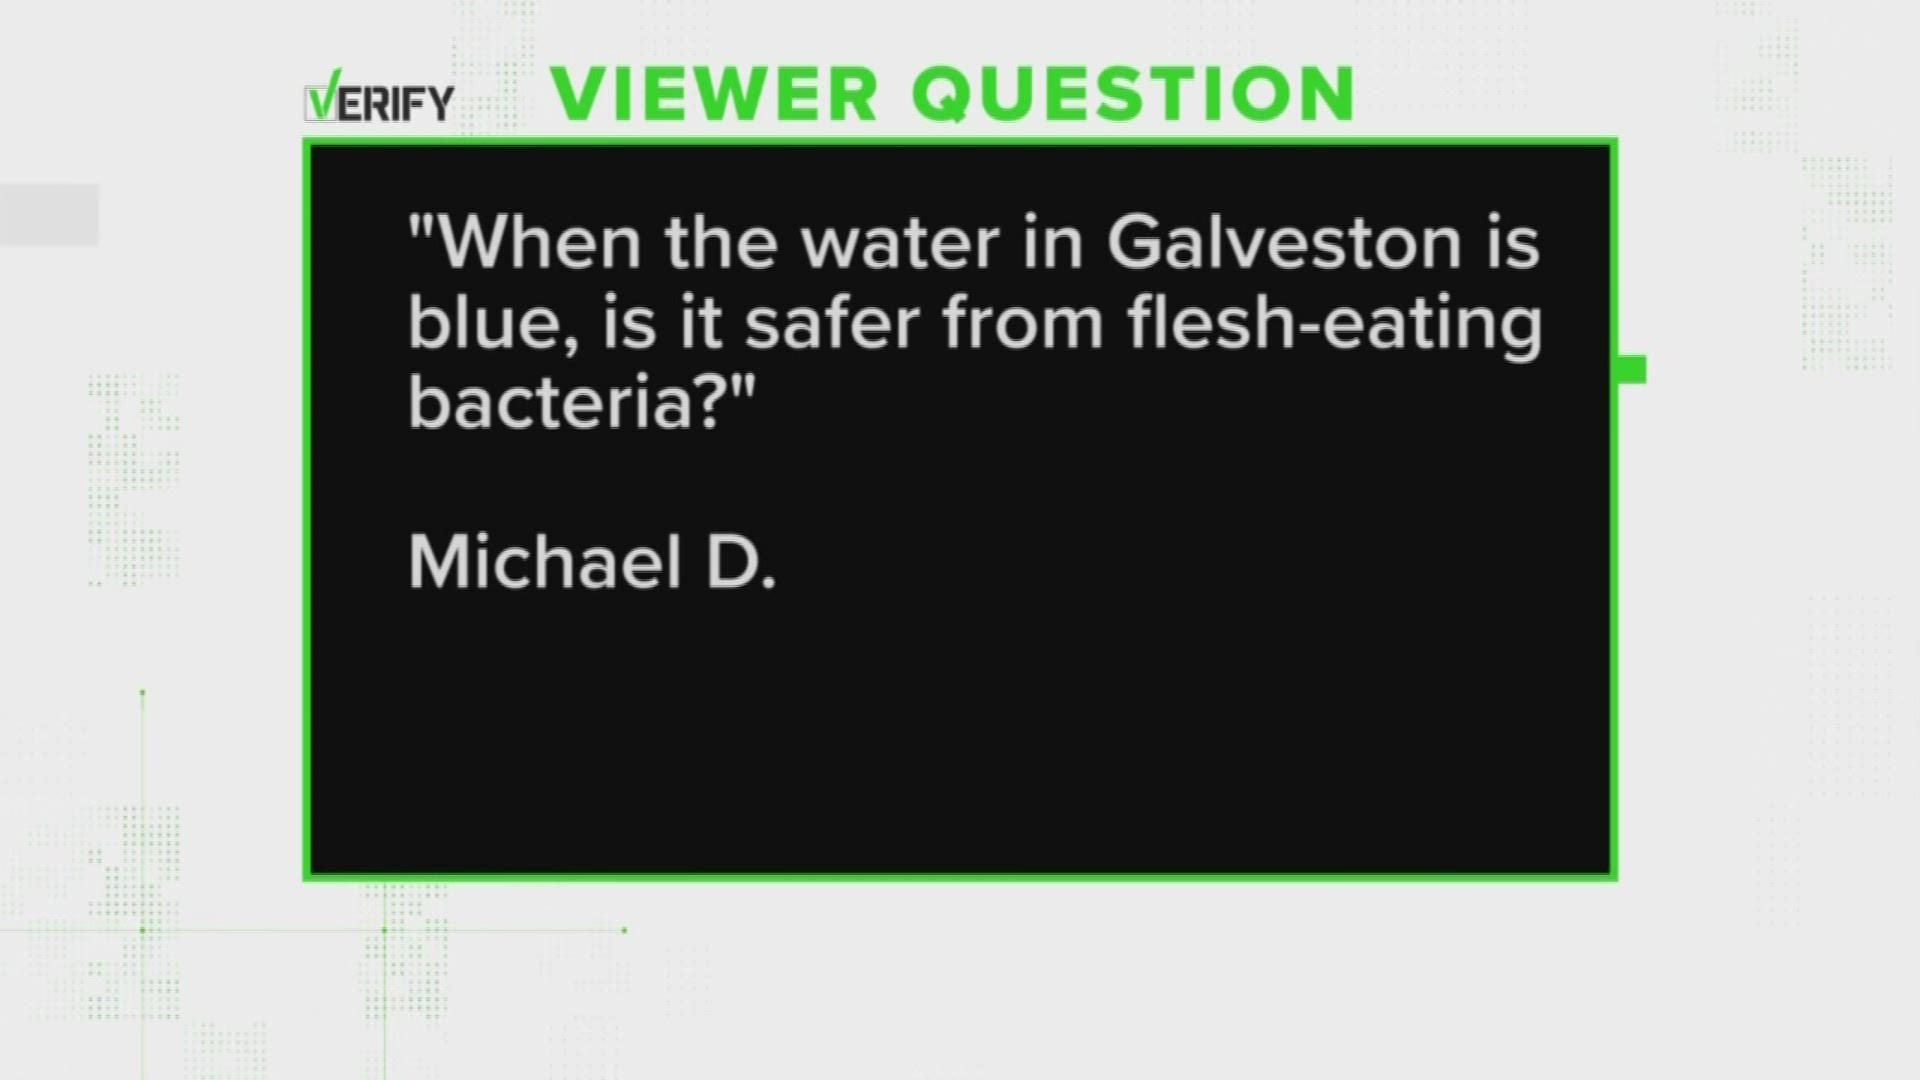 A viewer wanted to know if blue water in Galveston means it's safer from flesh eating bacteria, so our verify team spoke to a local health official from to get answers.